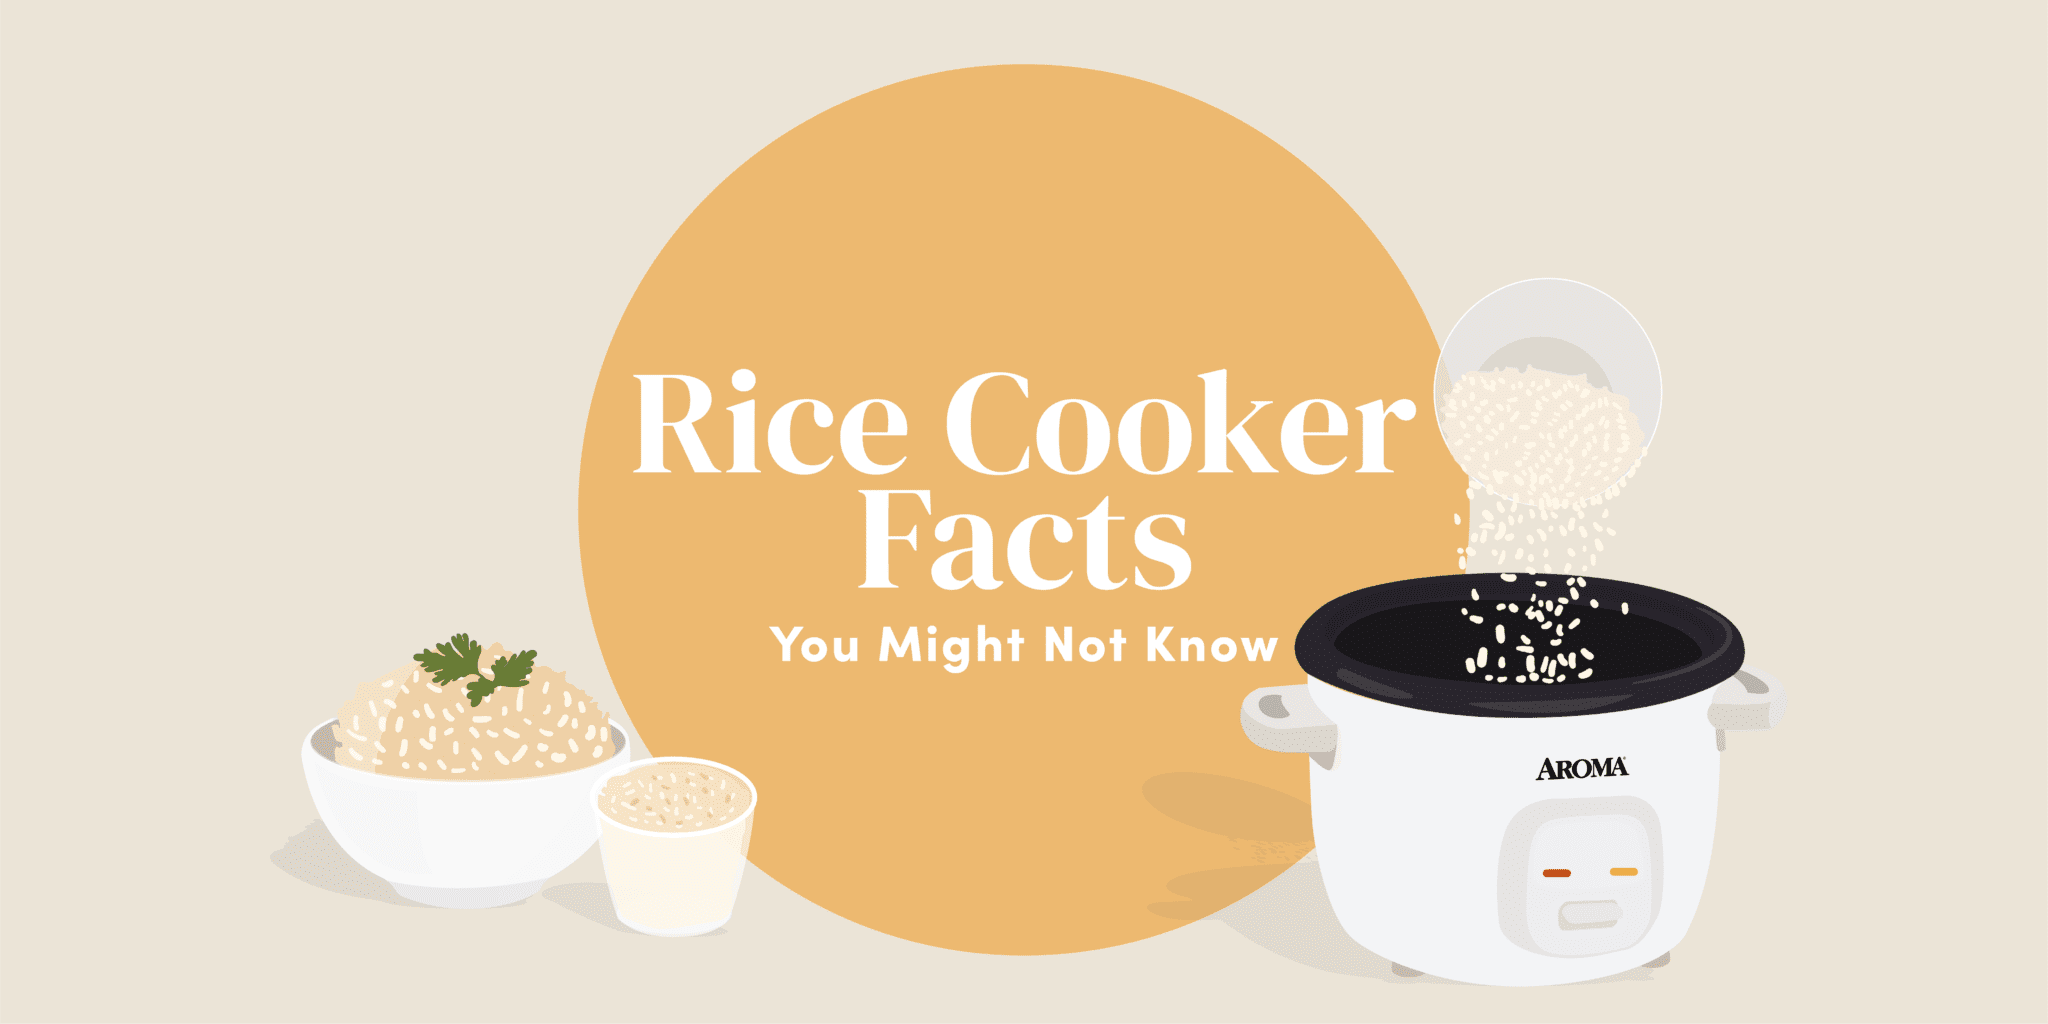 3 Rice Cooker Facts You Need to Know